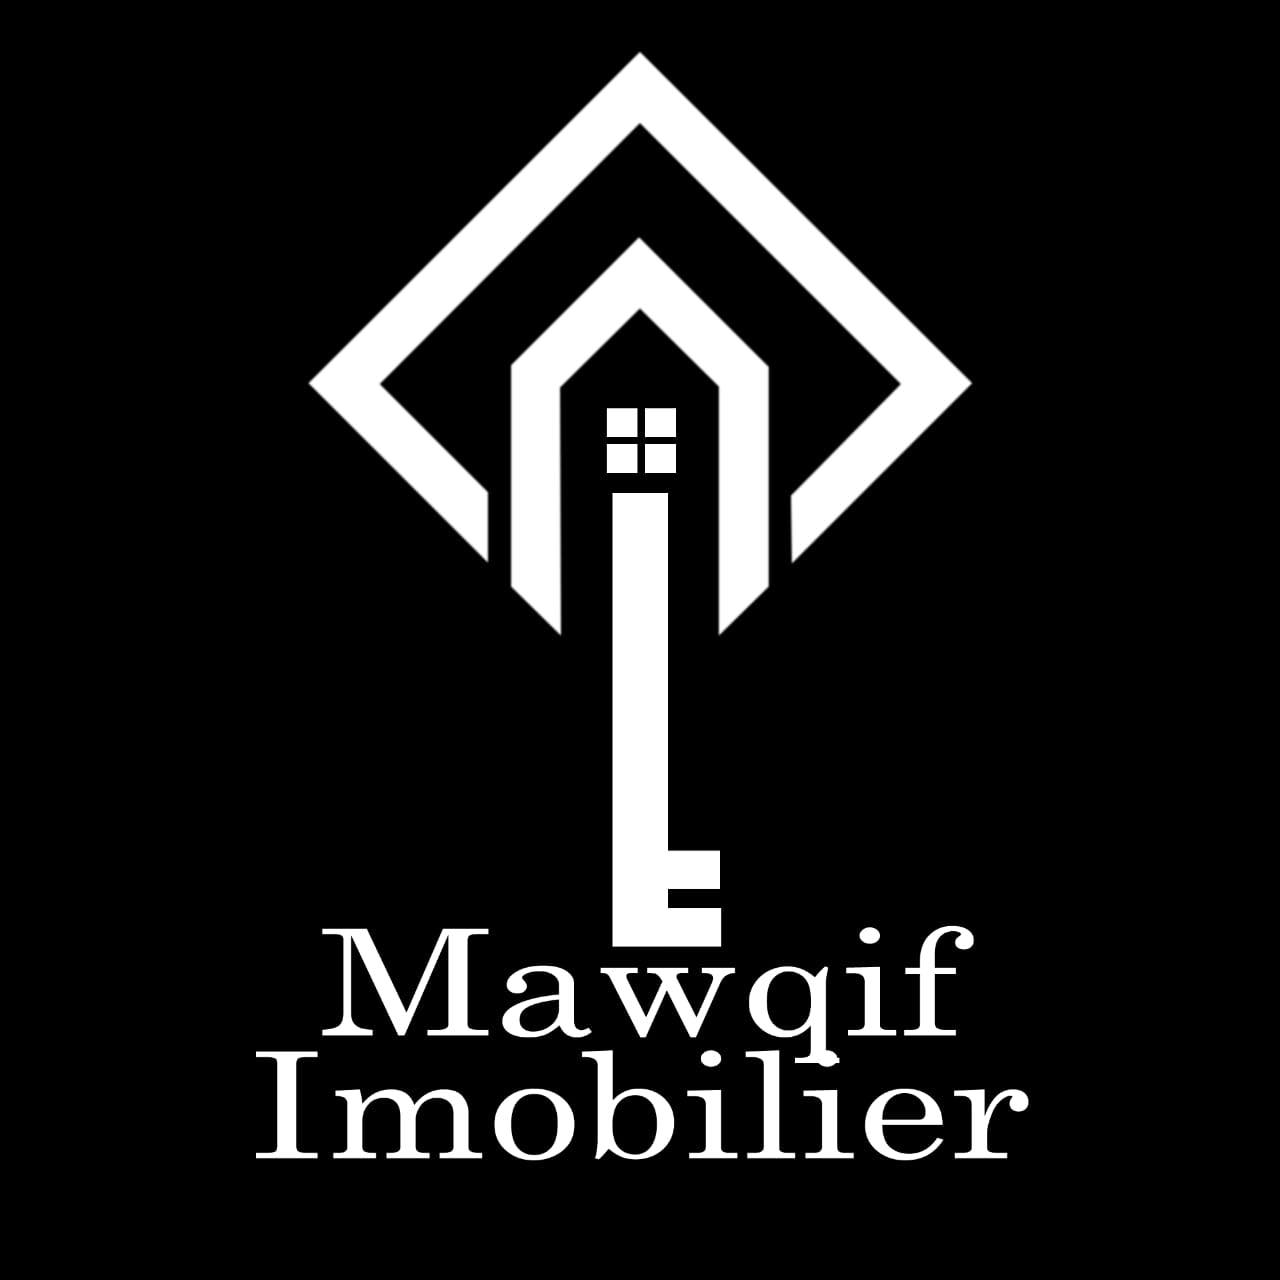 Maw9if Immobilier